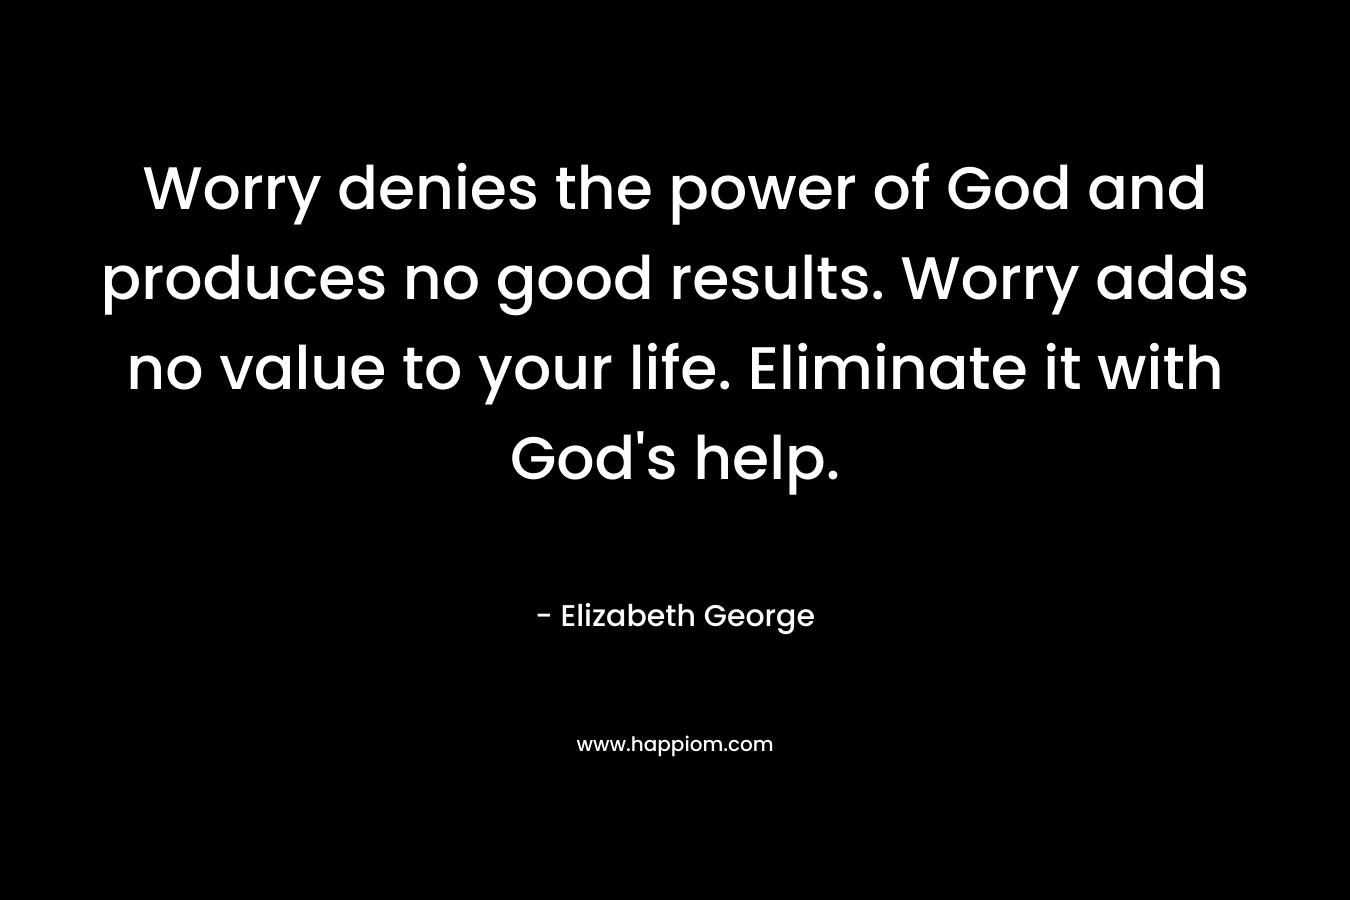 Worry denies the power of God and produces no good results. Worry adds no value to your life. Eliminate it with God’s help. – Elizabeth George